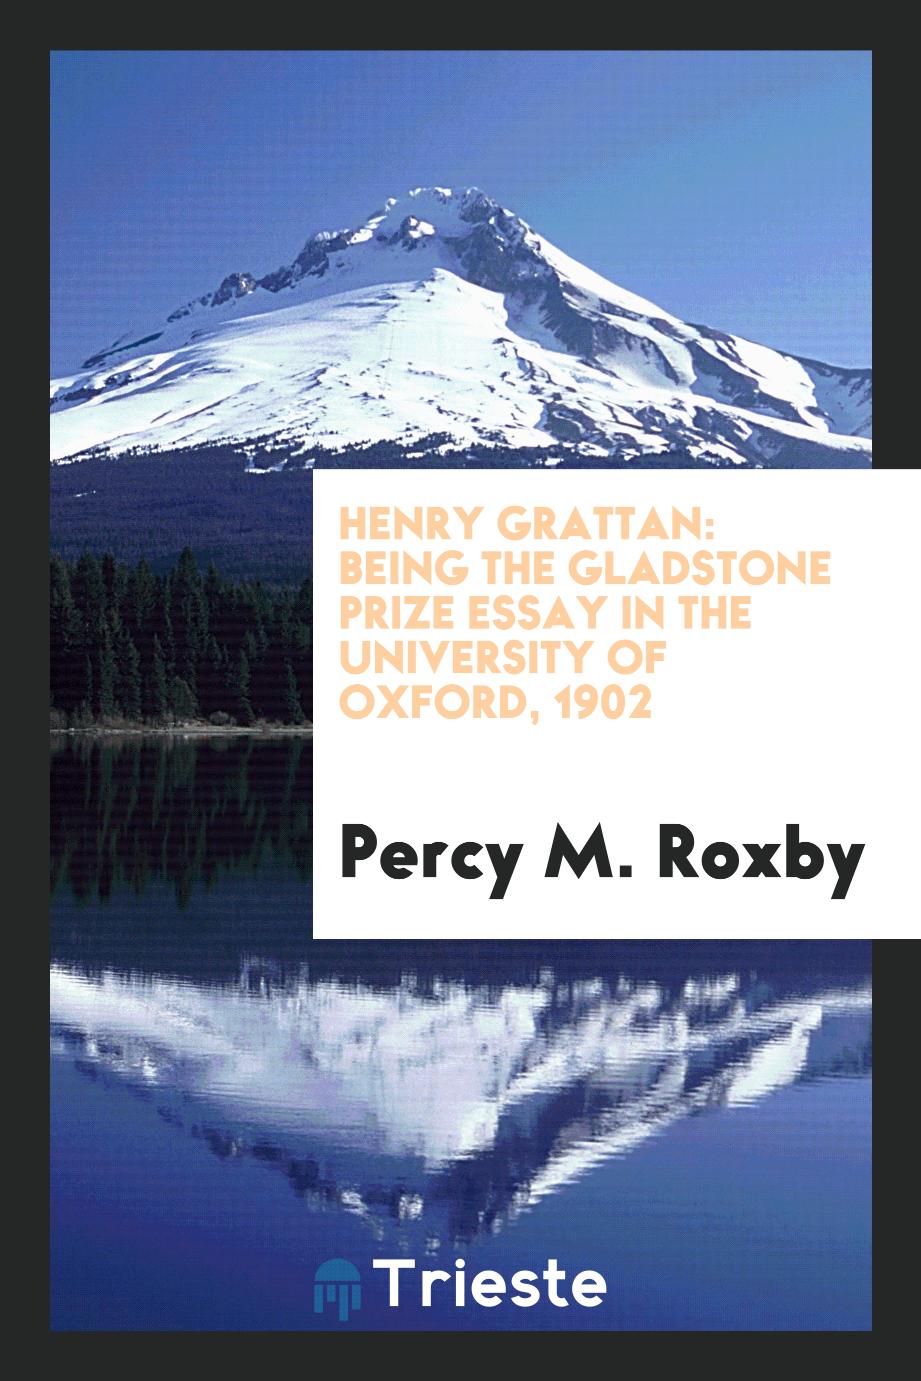 Henry Grattan: Being the Gladstone Prize Essay in the University of Oxford, 1902